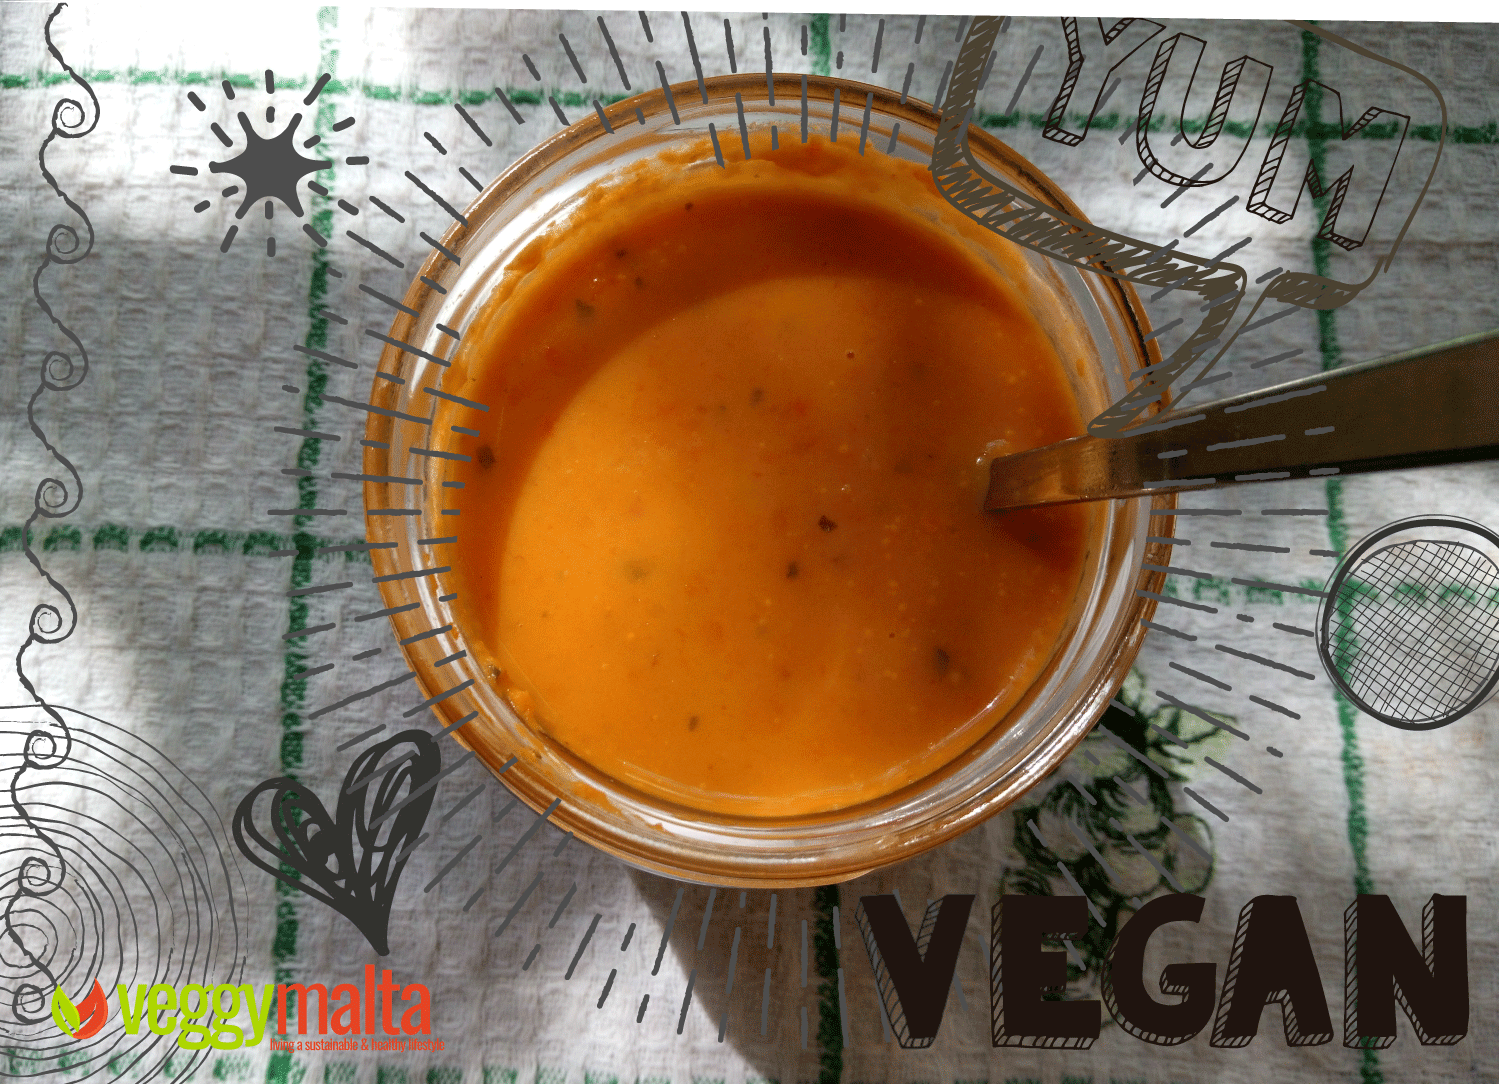 lngbeins-daily-meal-soup-vegan-organic-gluten-free-open